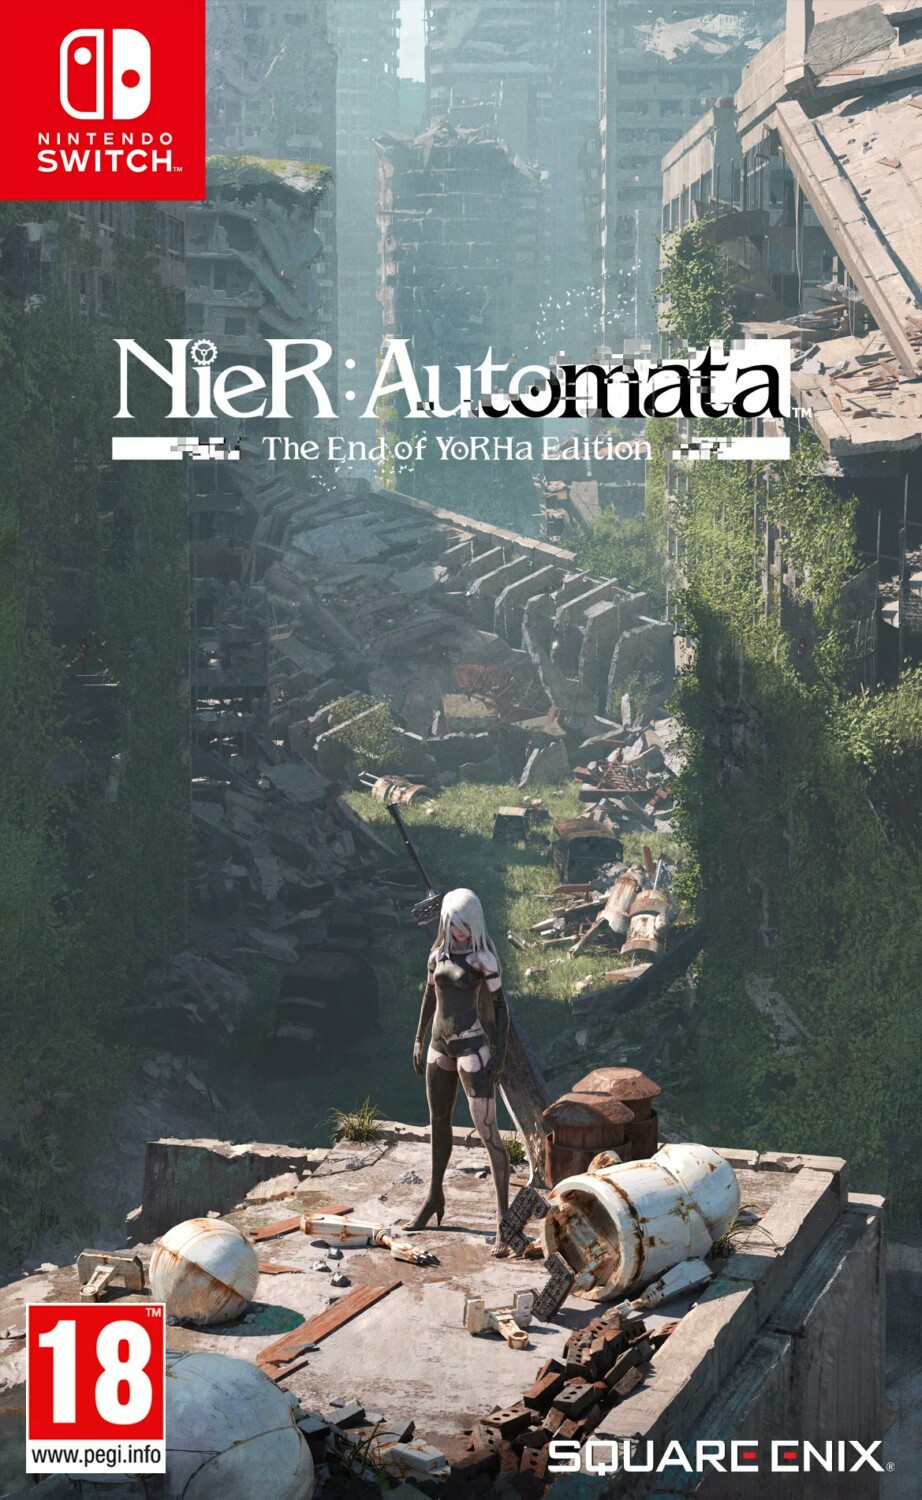 NieR: Automata The End of the YoRHa Edition - Nintendo Switch 662248926391